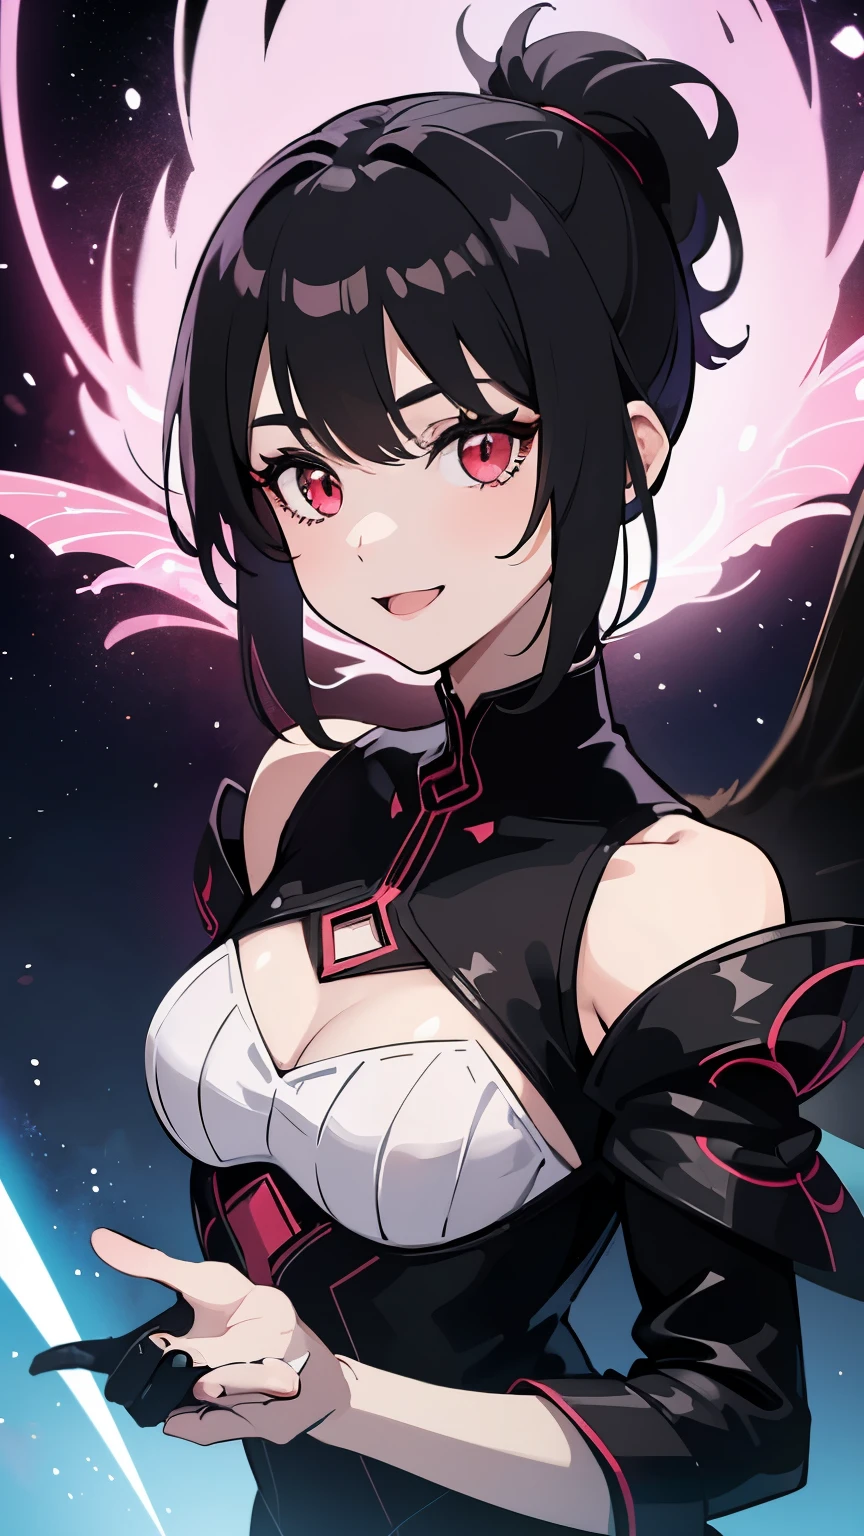 1girl, fairy girl, small, fairy wings, ((glowing pink fairy wings)), (fairy wings), Black hair color, ponytail hairstyles, short ponytail, red eye color, wearing leather armor, silver shoulder pads, black clothes,(glowing eyes), high resolution, extremely detailed CG unity 8k wallpaper, ((masterpiece)), ((top-quality)), (beautiful illustration), ((an extremely delicate and beautiful)), (masterpiece, Best quality, ultra high resolution), 1 girl, pale skin, Black Crown, red eyes, Luminous_eyes, neon red eyes, ultra detailed eyes, Beautiful and detailed face, detailed eyes, (Centered, torso), (wide shot:0.9), facing the viewer, Eye level, (floating hair), character focus, ((black light)), ((dark lighting)), cinematic lighting ,(darkness), (concept art), ((energetic face)), wide open smile, waving excitedly, dark black hair, ((red eyes))